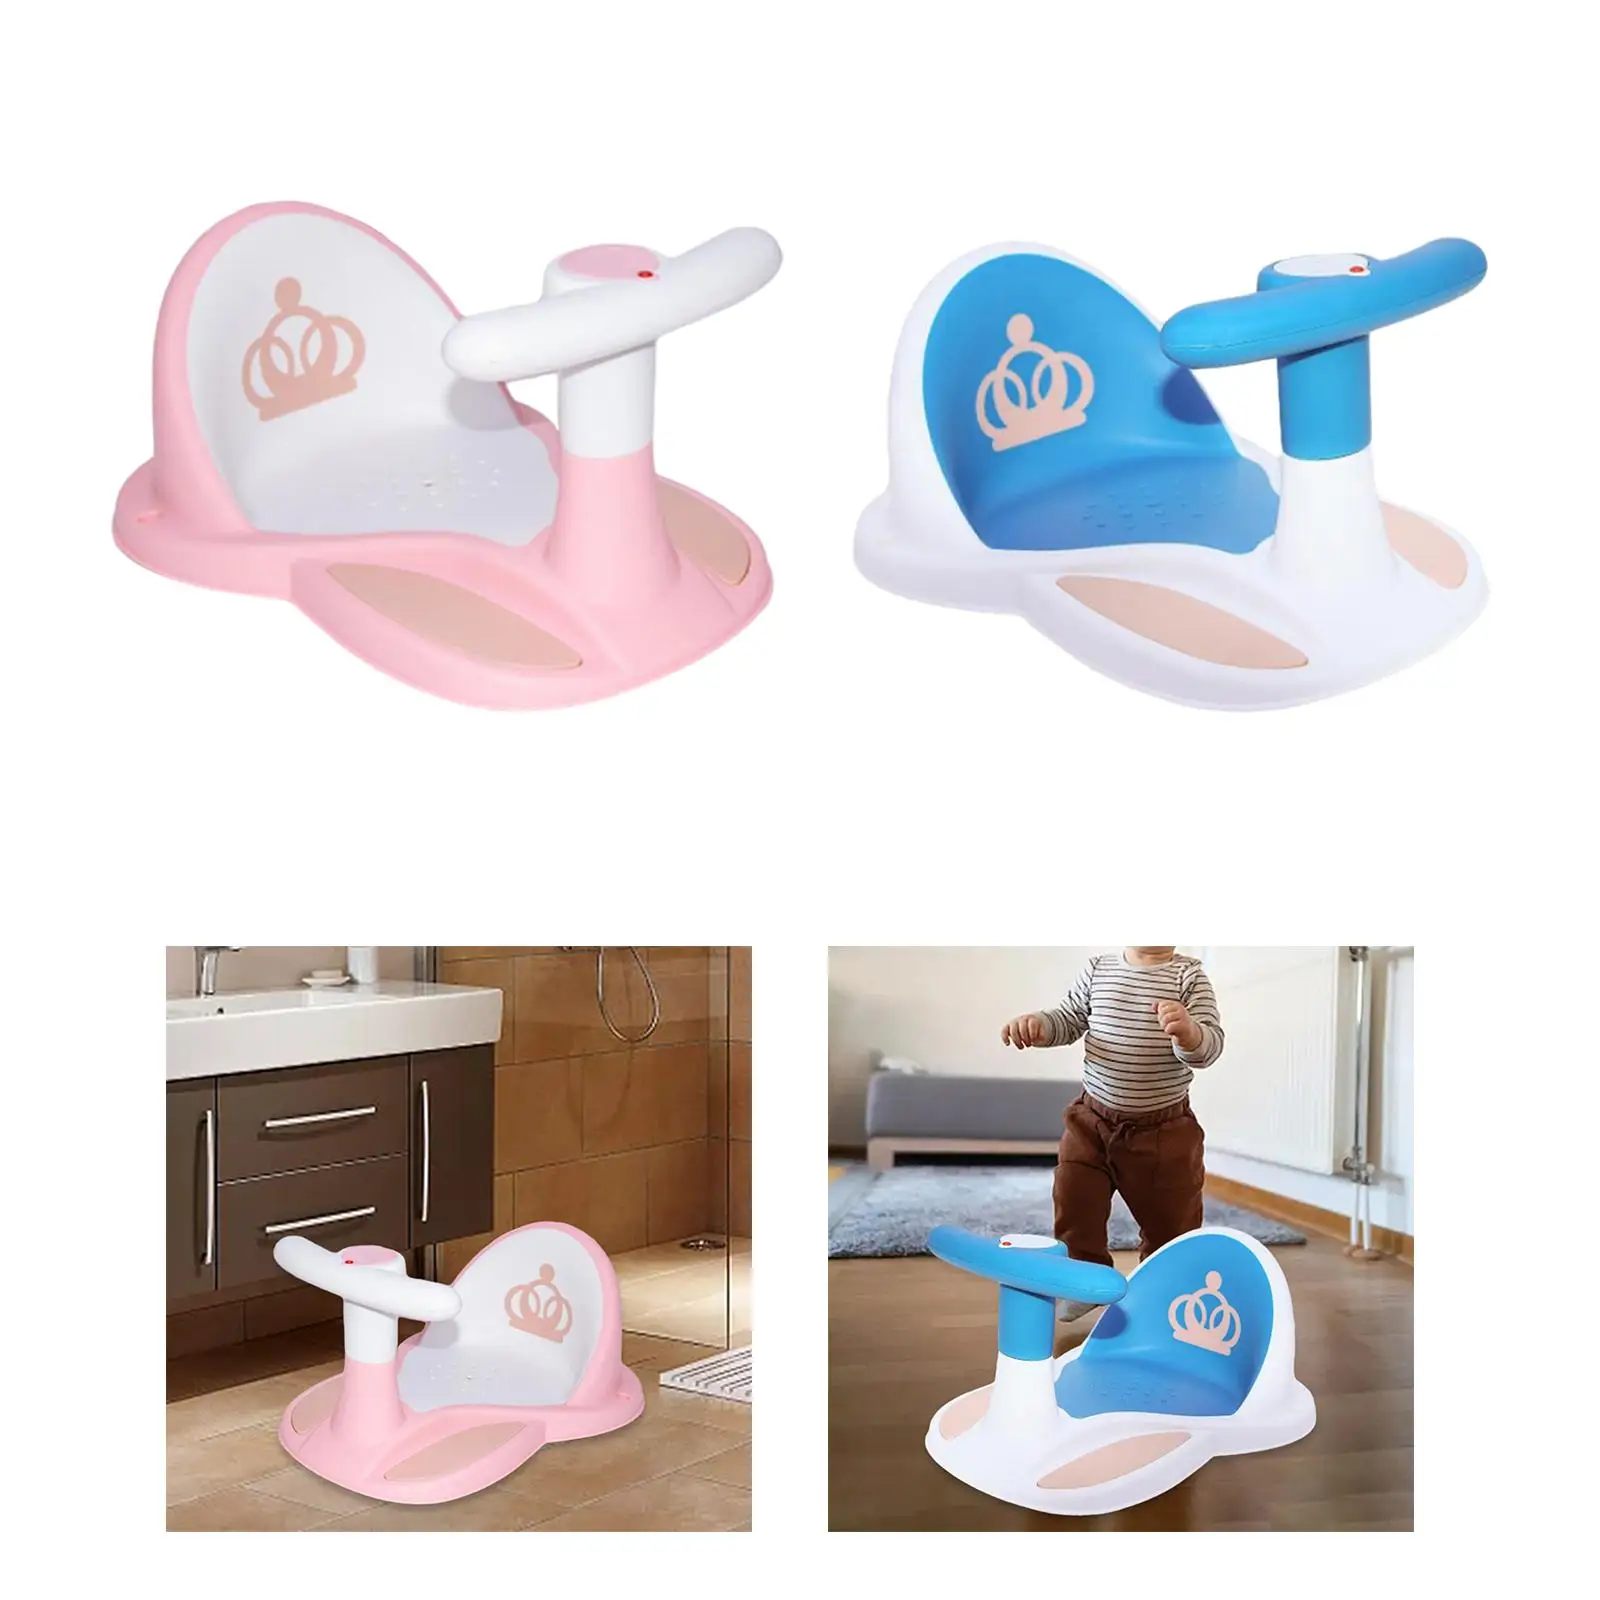 Baby Bath Seat Tub Sitting up Bath Seat Support Bathroom Infants Bath Seat Toddlers Shower Seats for Boys Kids Infants Baby